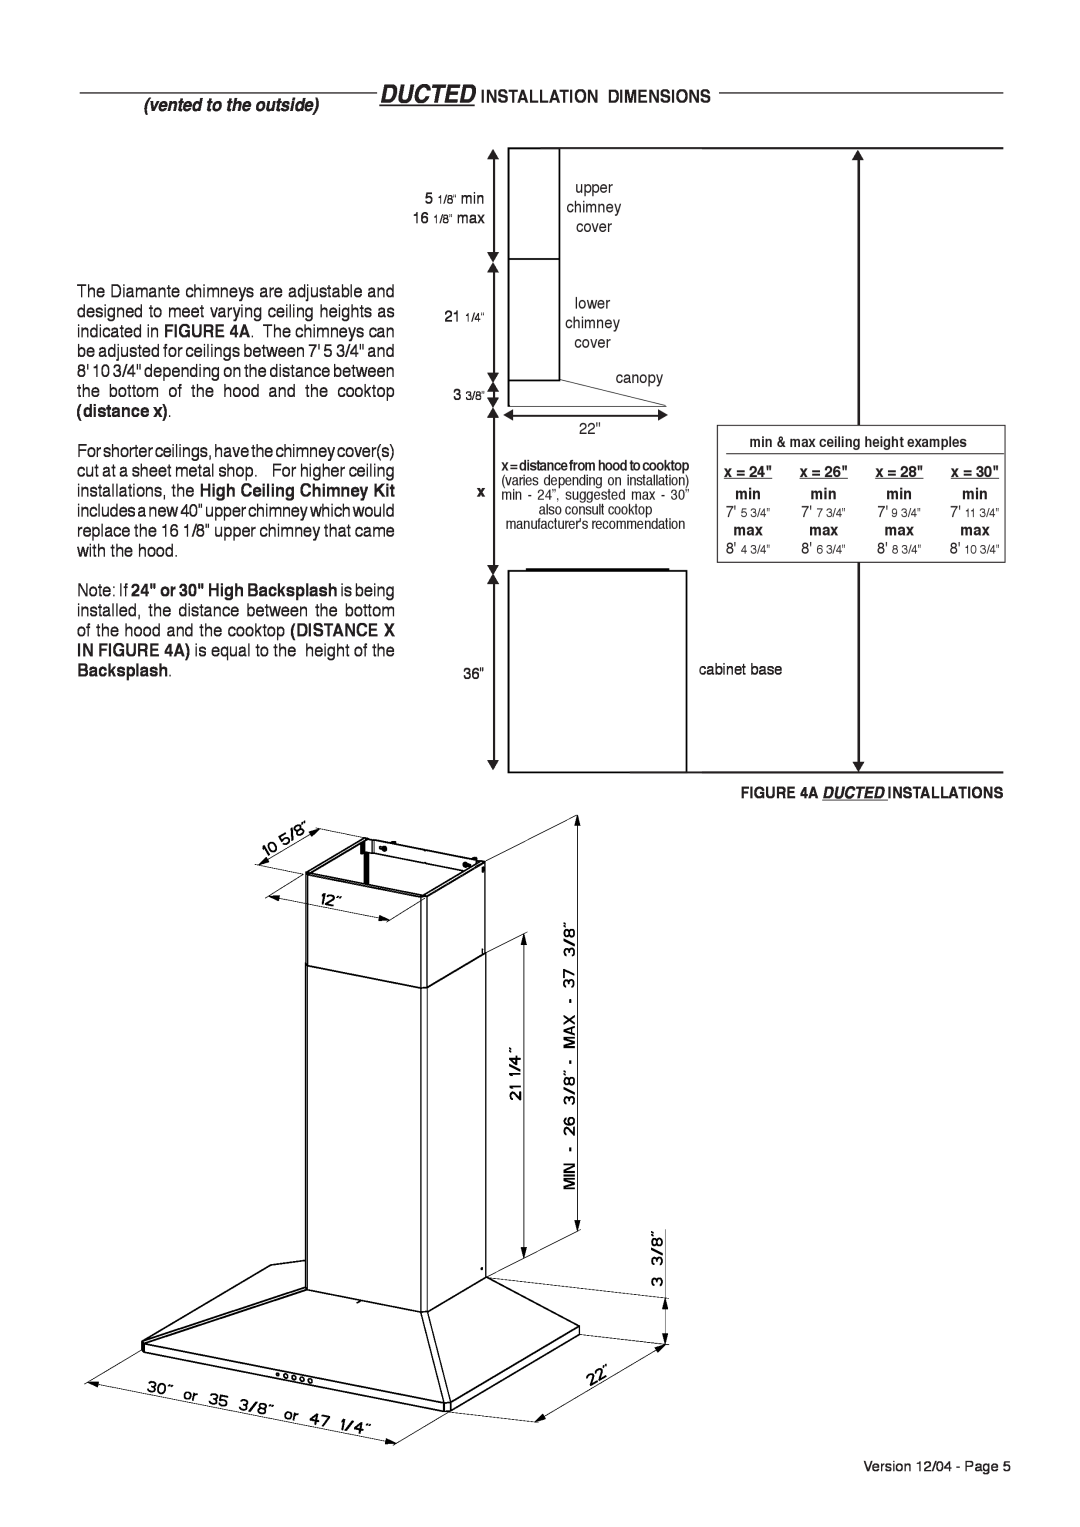 Faber Diamante Ductedinstallation Dimensions, A Ductedinstallations, min & max ceiling height examples, cover, lower 